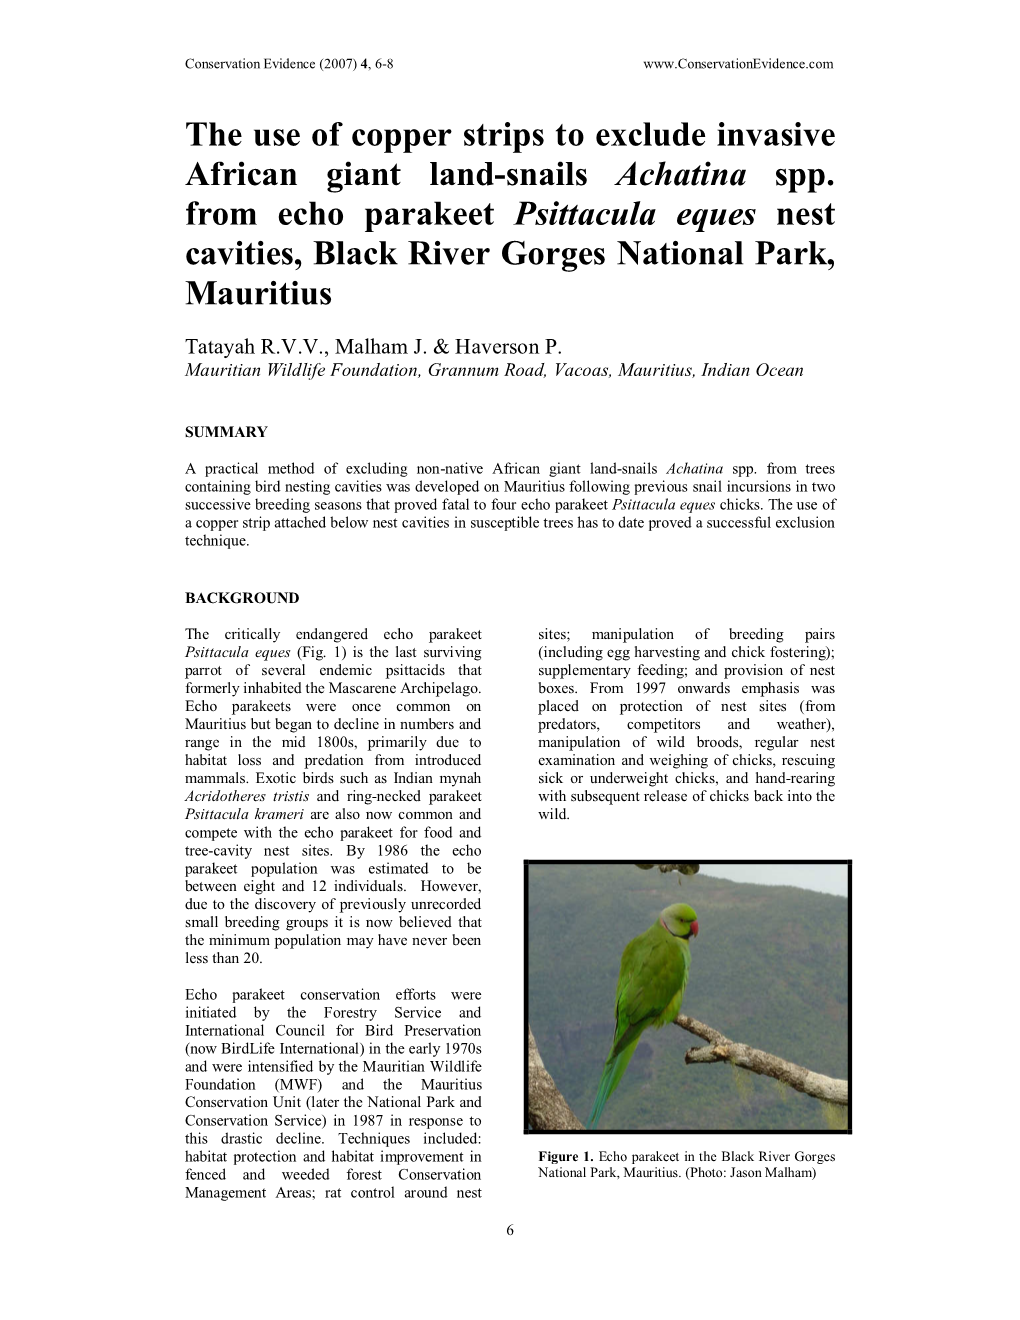 The Use of Copper Strips to Exclude Invasive African Giant Land-Snails Achatina Spp. from Echo Parakeet Psittacula Eques Nest Ca